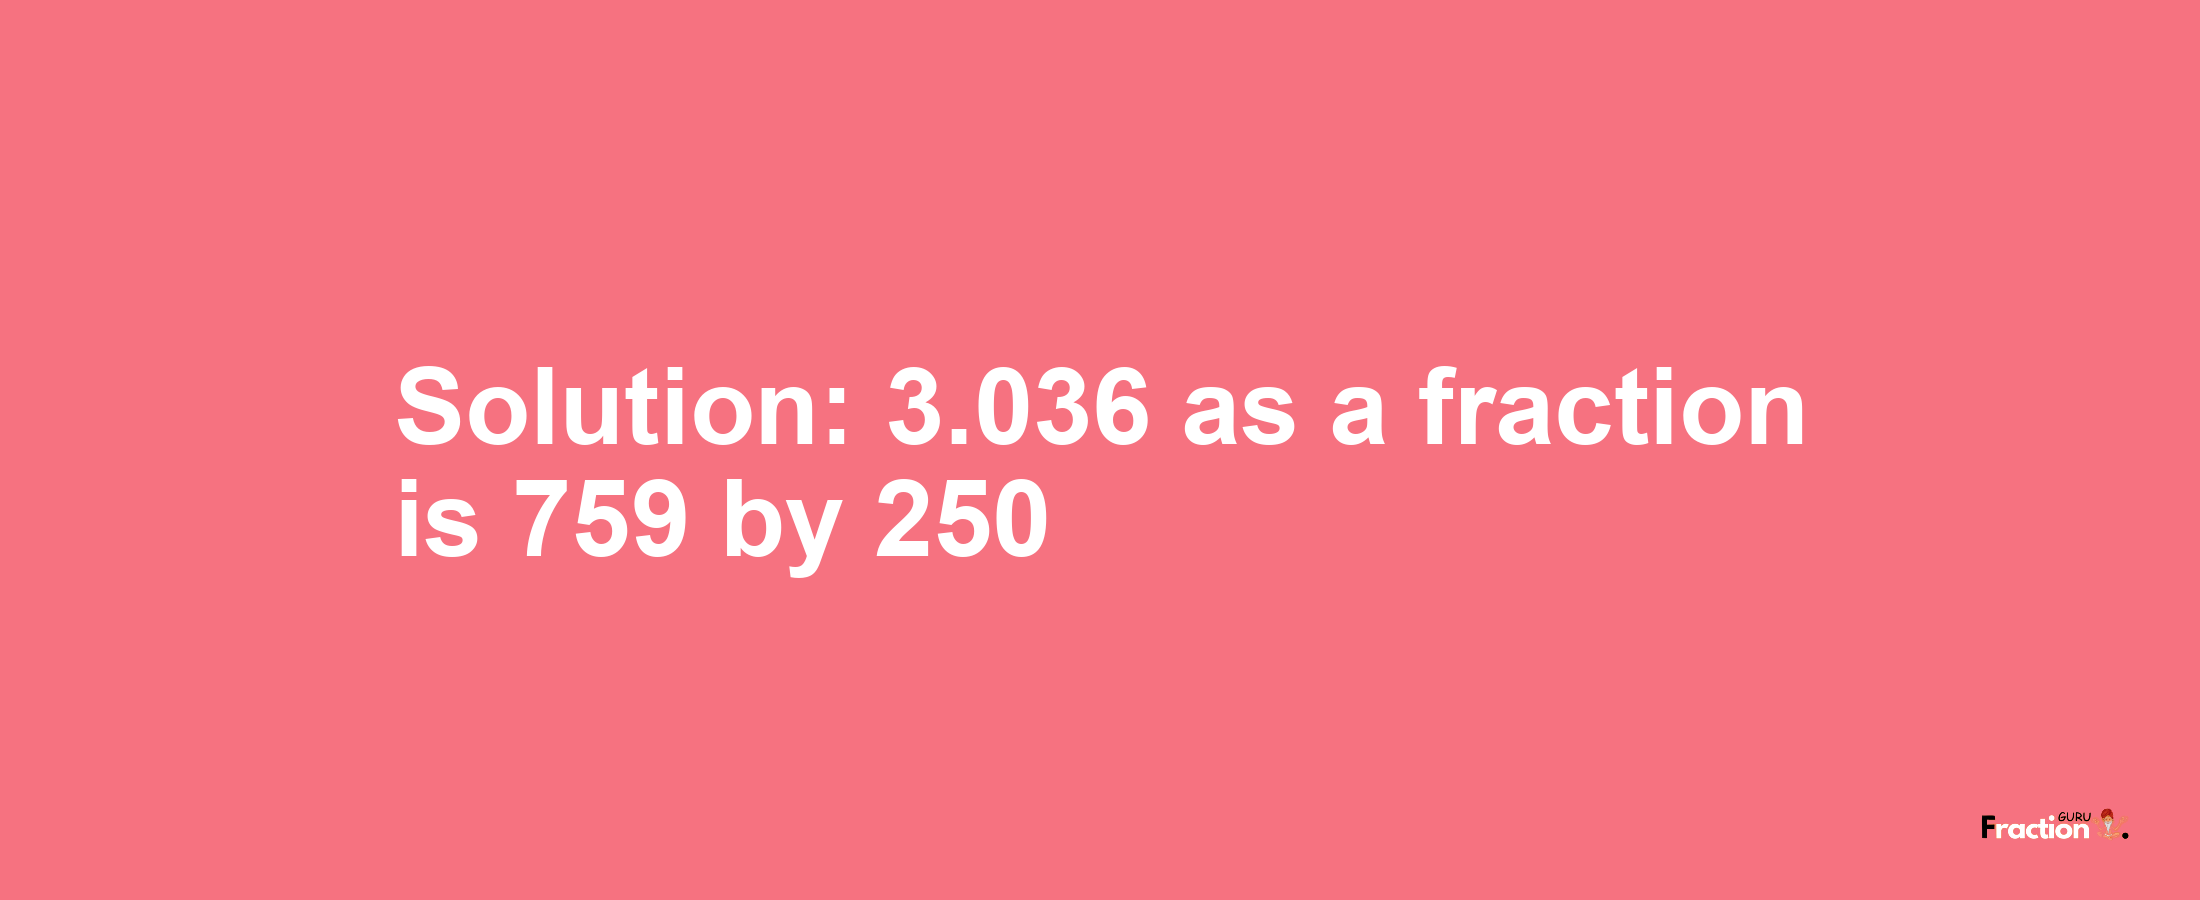 Solution:3.036 as a fraction is 759/250